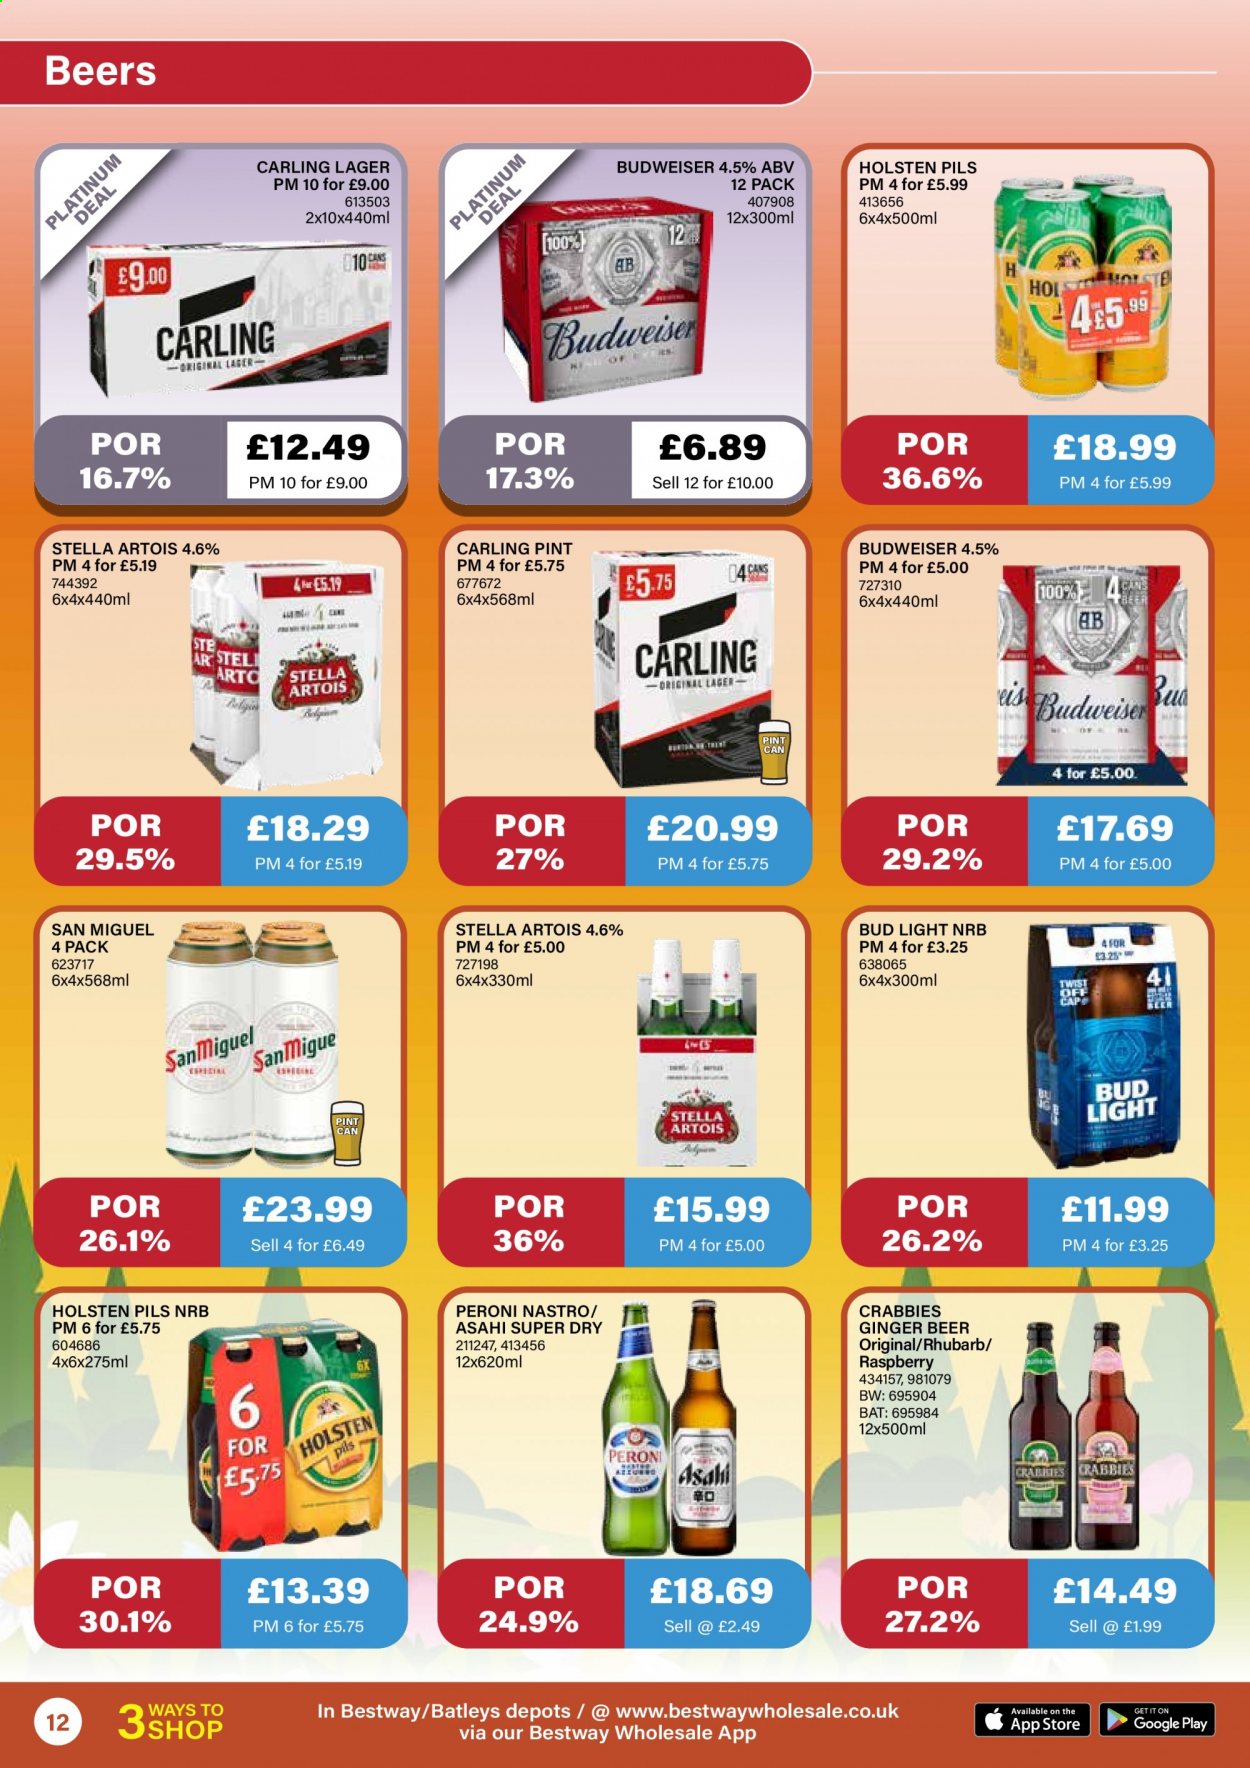 thumbnail - Bestway offer  - 23/04/2021 - 20/05/2021 - Sales products - Budweiser, Stella Artois, Bud Light, ginger beer, beer, Peroni, Carling, San Miguel, Holsten, Lager. Page 12.